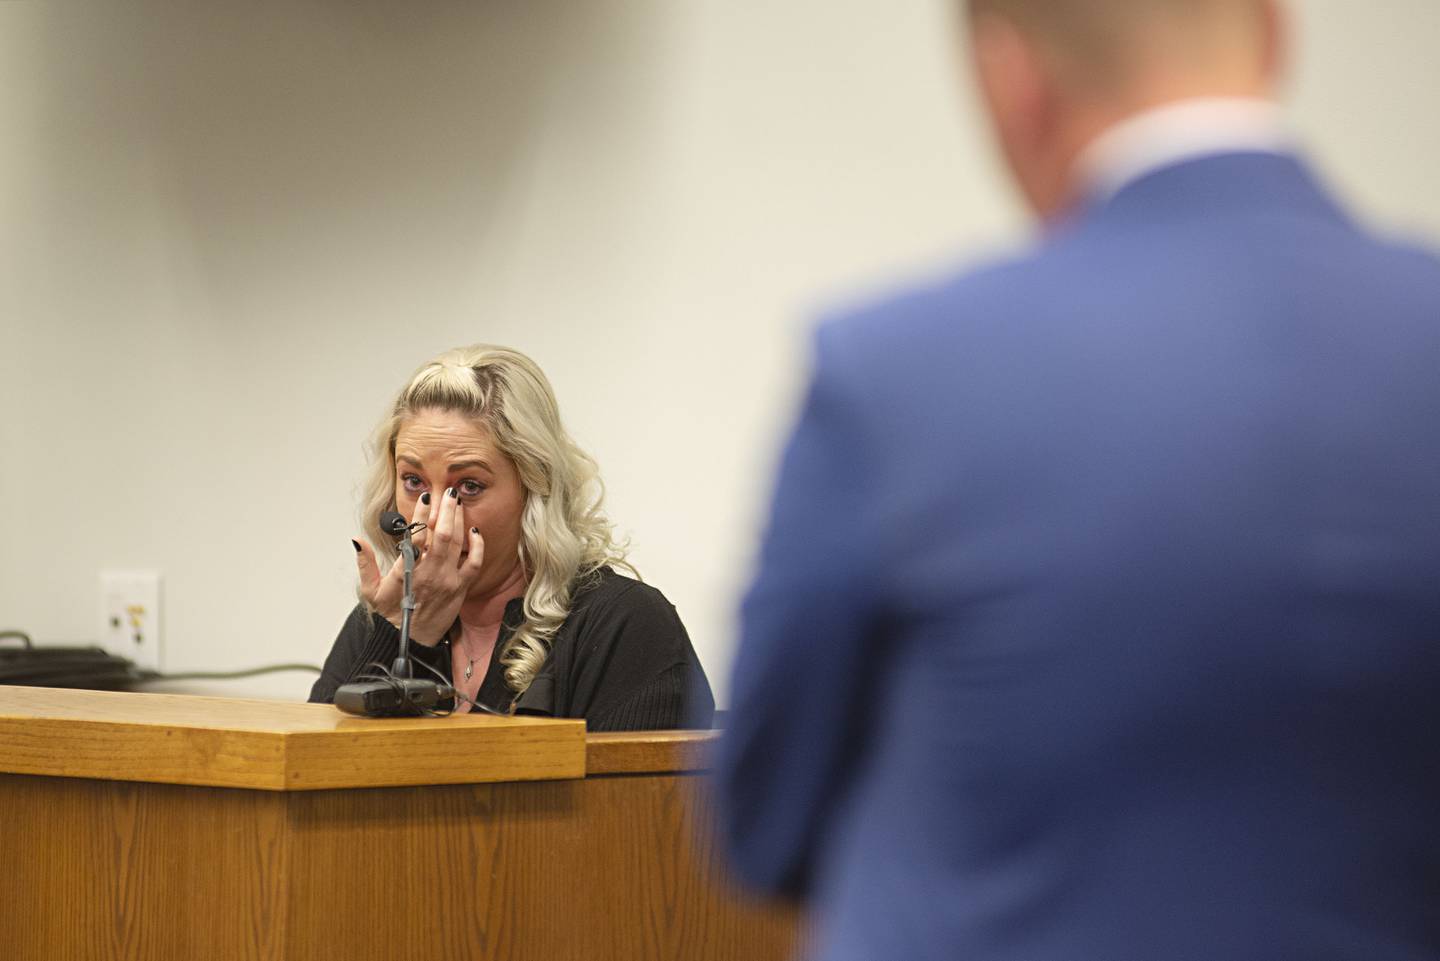 Danik Wilson, sister of school shooter Matthew Milby, tells the court about the abusive home the two endured while living in Dixon.